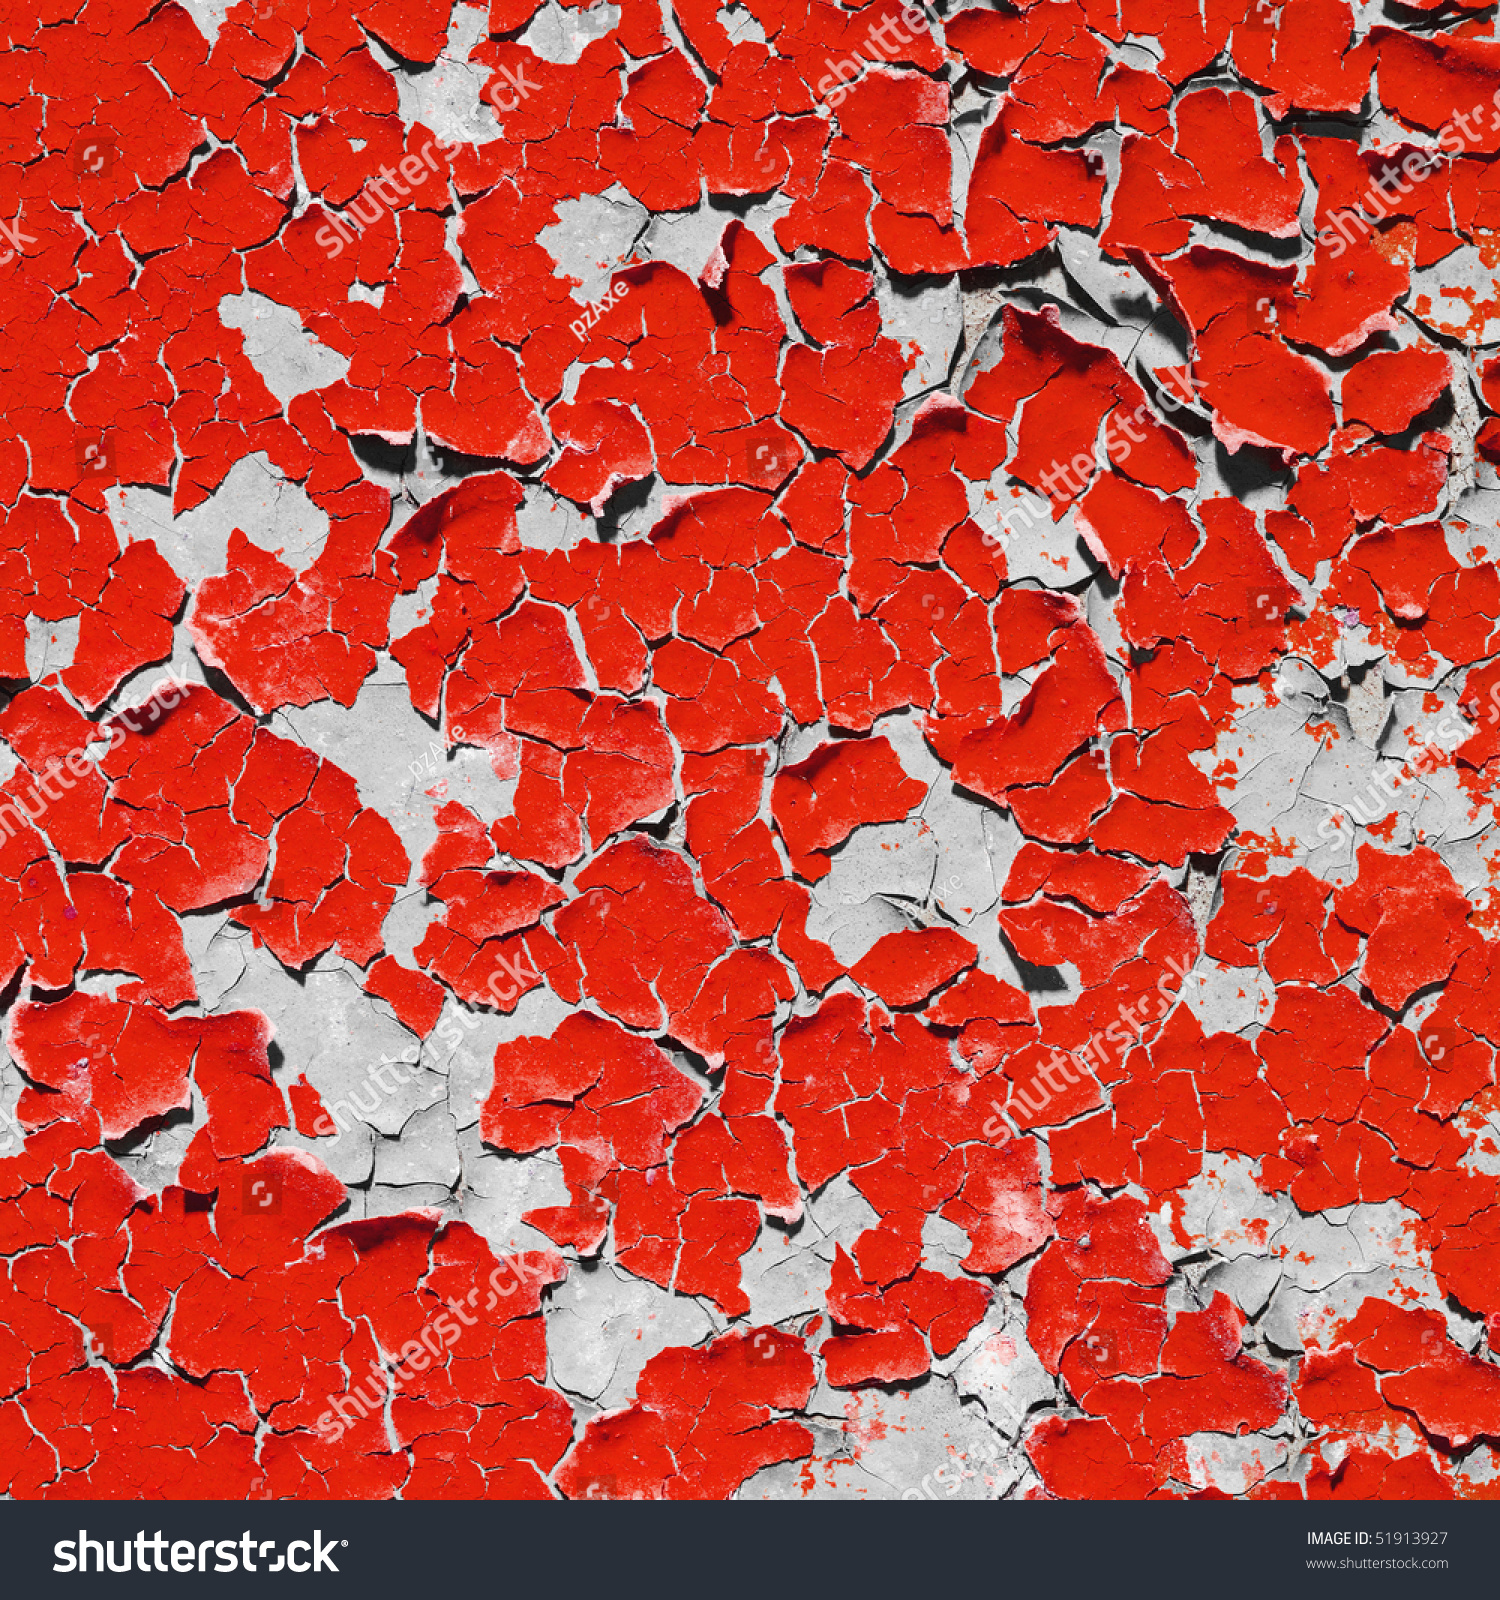 Square Bright Red Texture Peeling Paint Stock Photo 51913927 ...